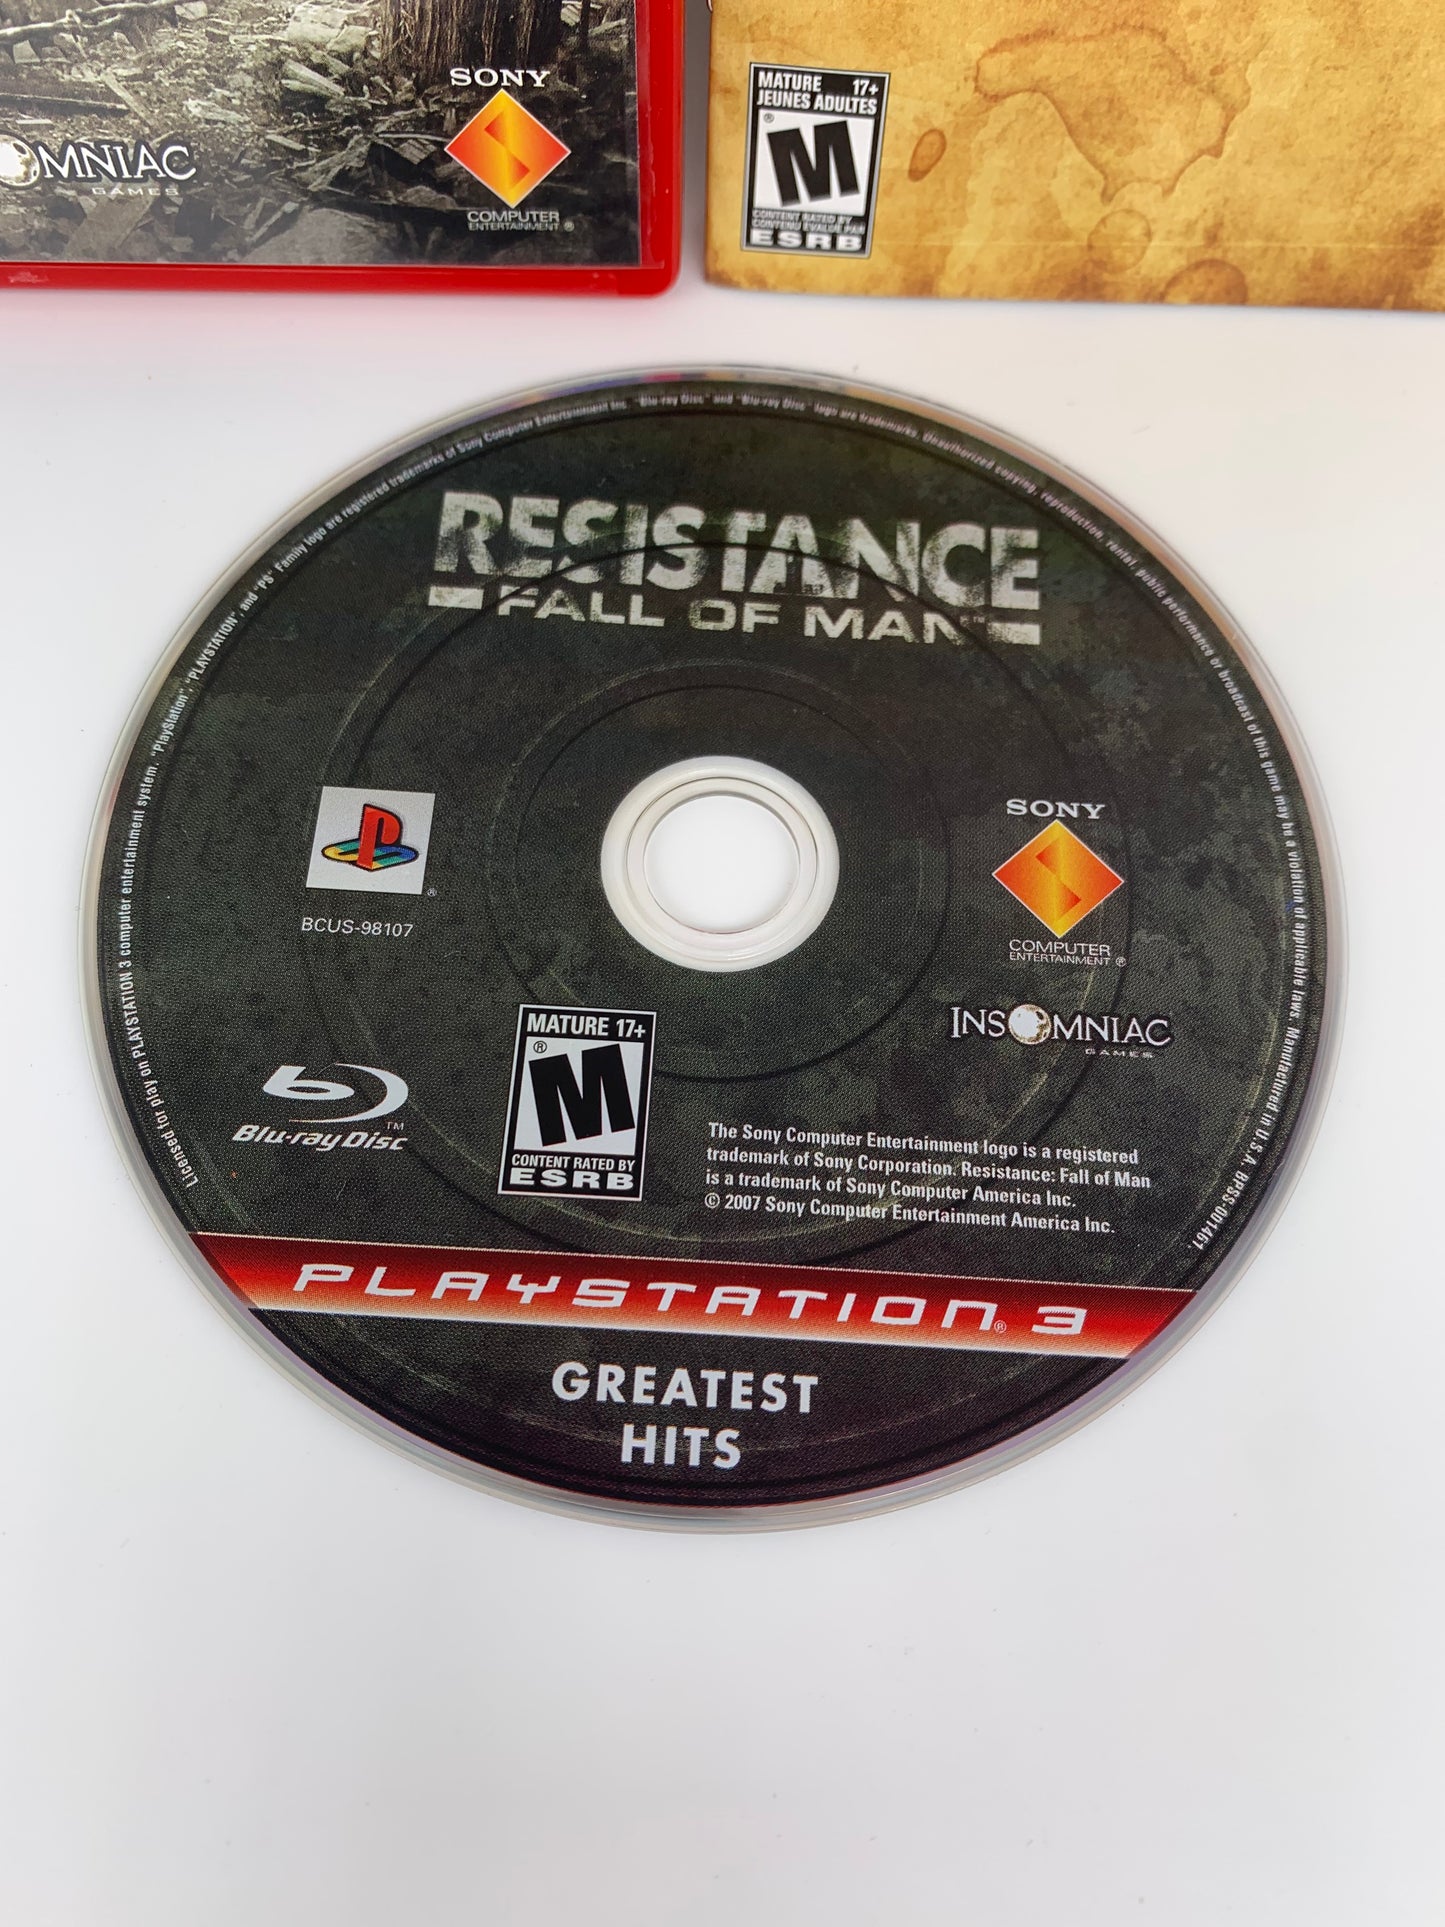 SONY PLAYSTATiON 3 [PS3] | RESiSTANCE FALL OF MAN | GREATEST HiTS